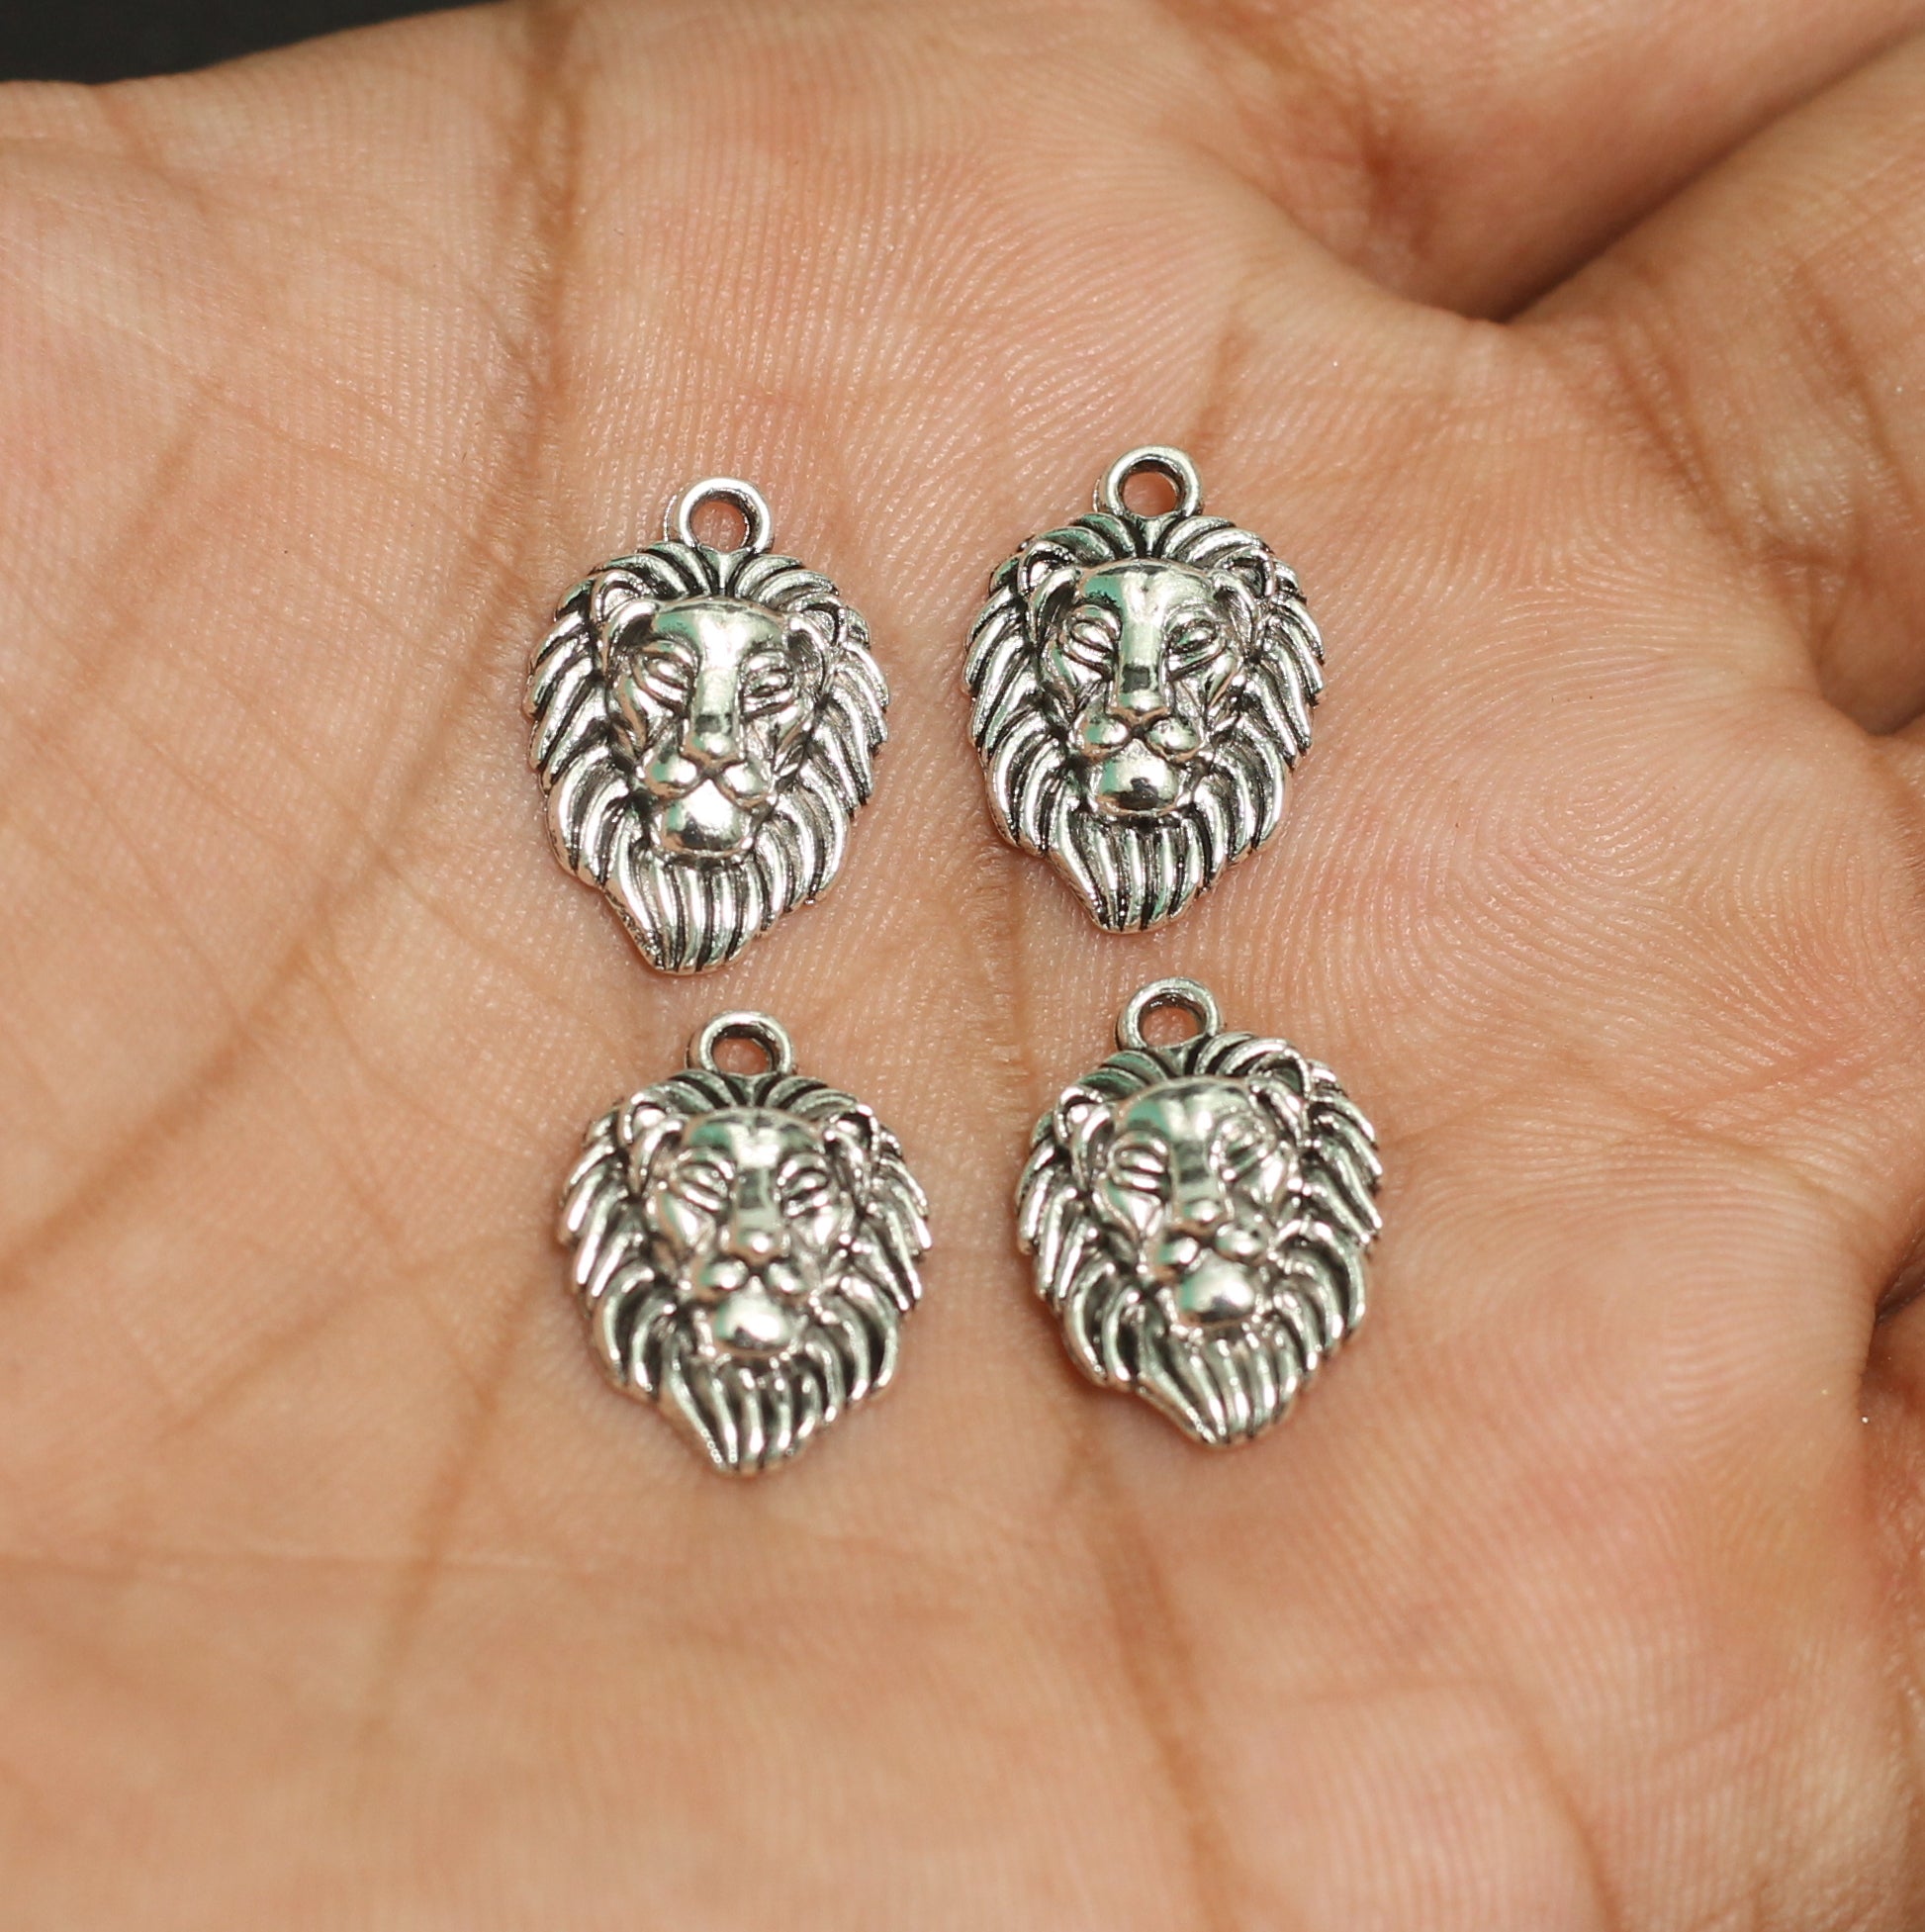 16x12mm German Silver Lion Face Charms